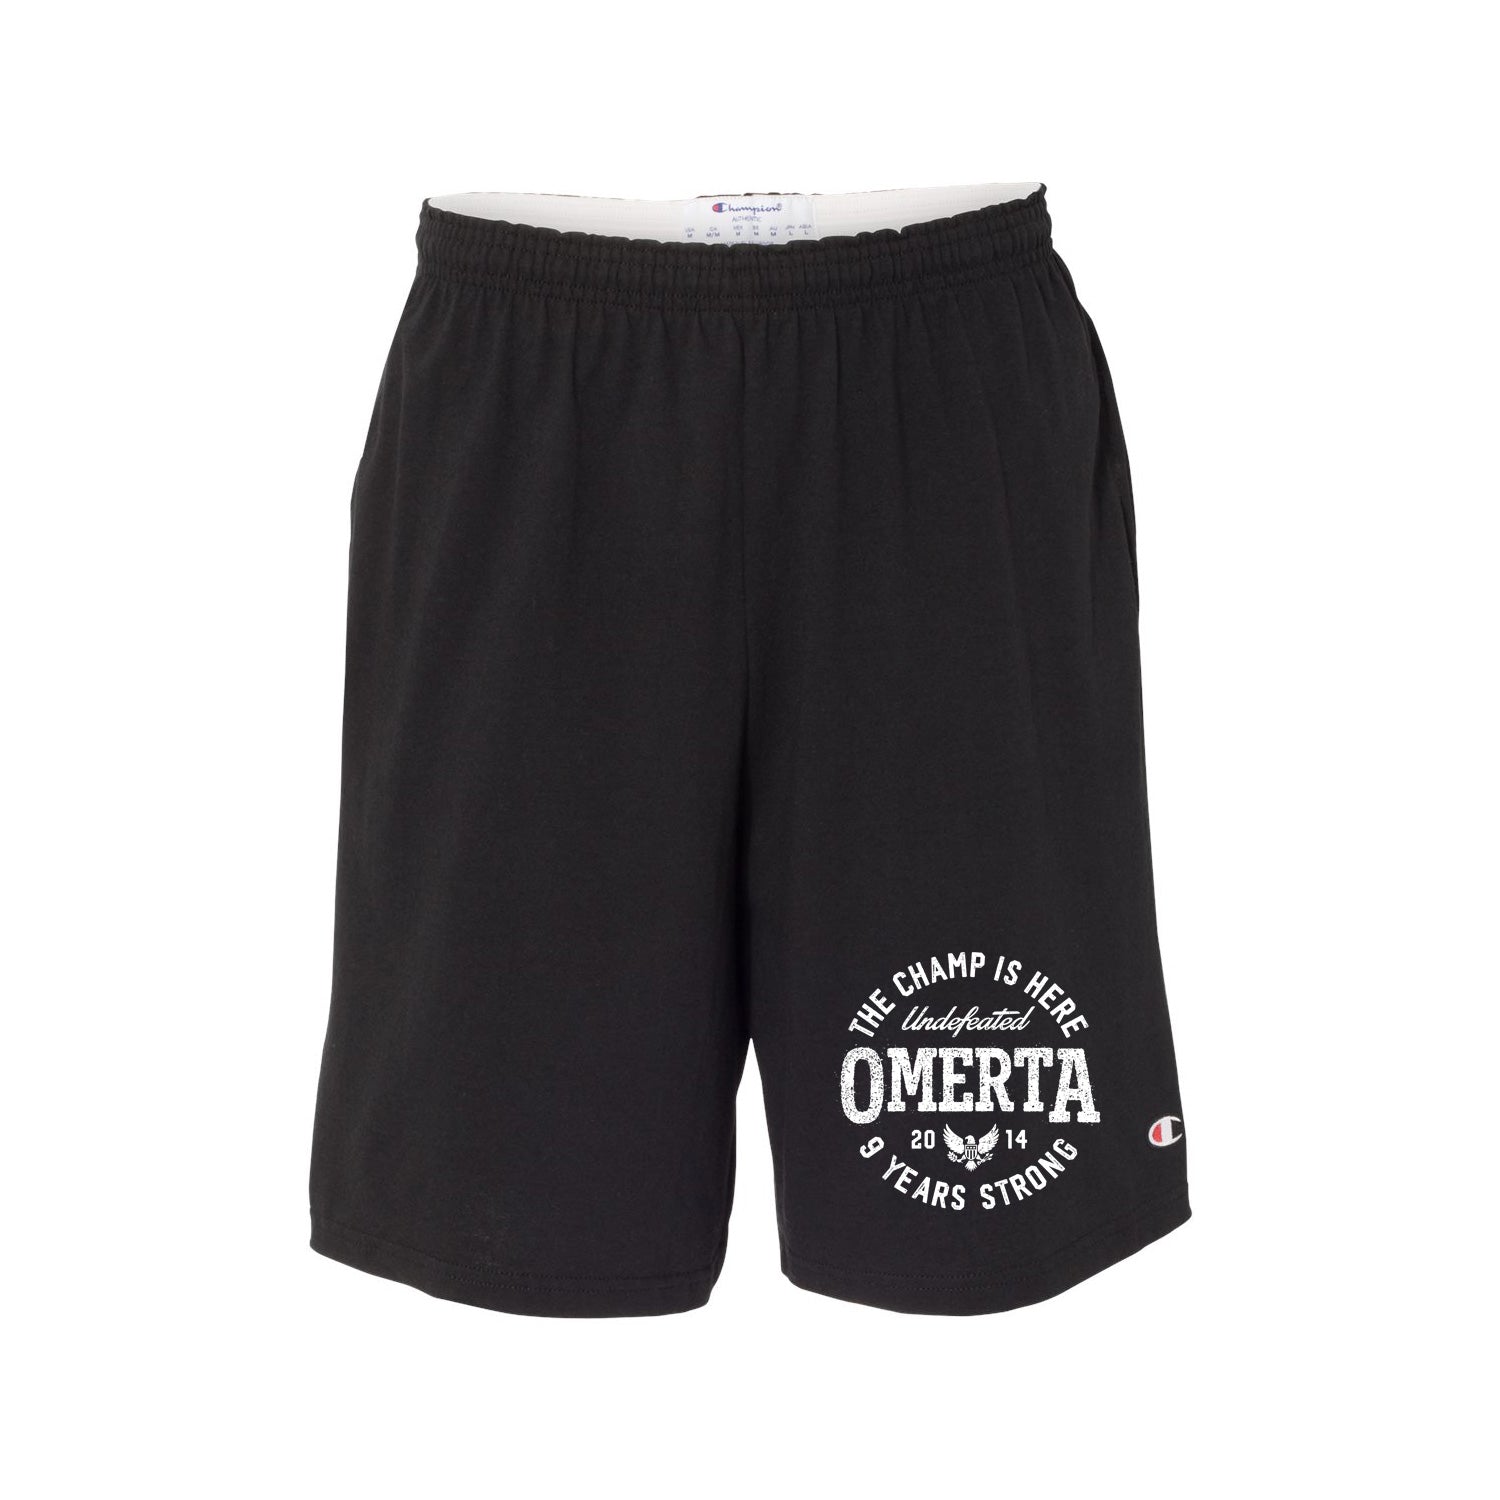 The Champ Is Here Jersey Black Shorts